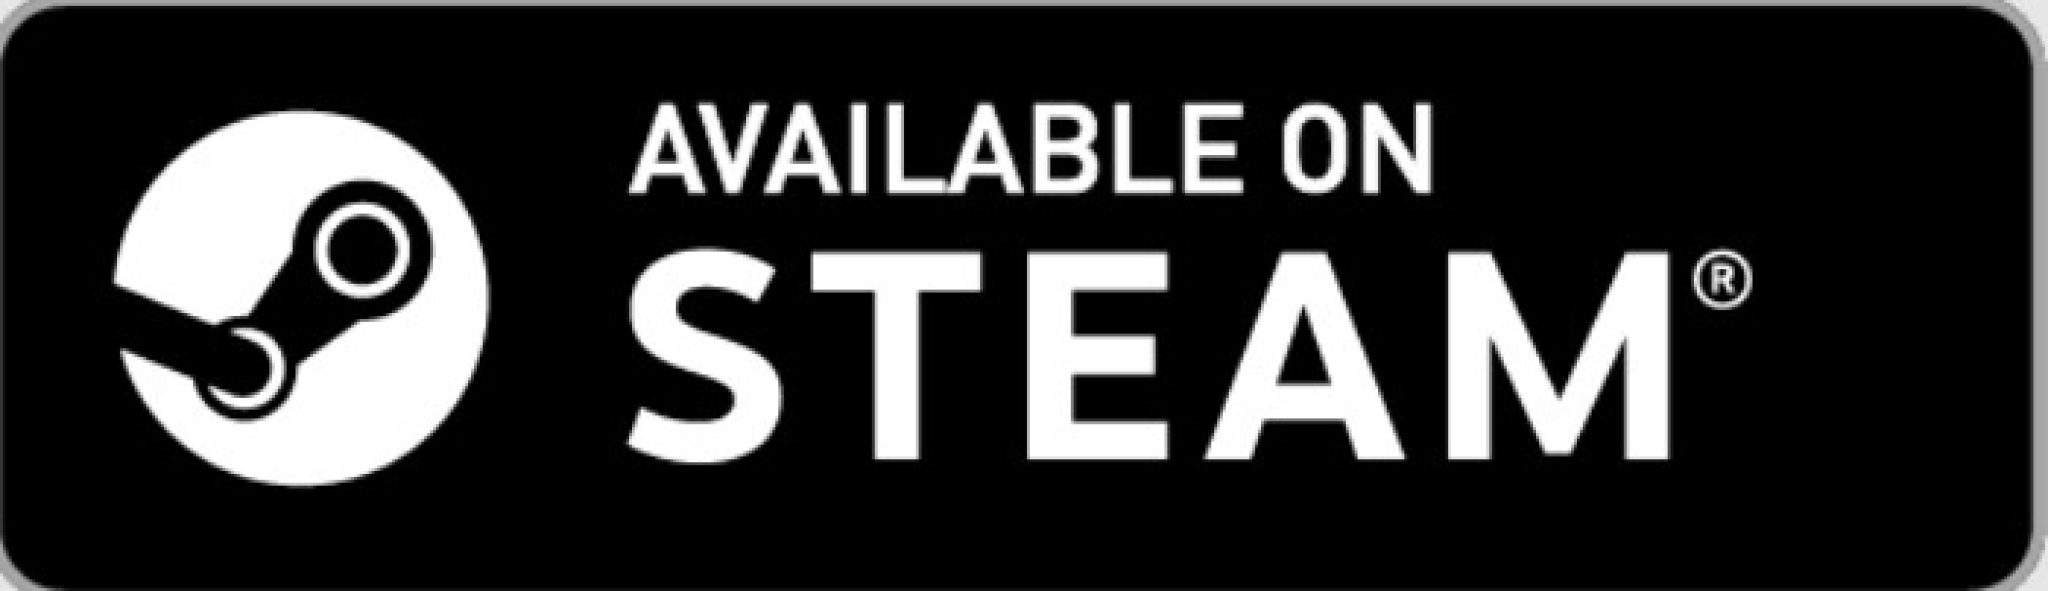 Available on steam button фото 89